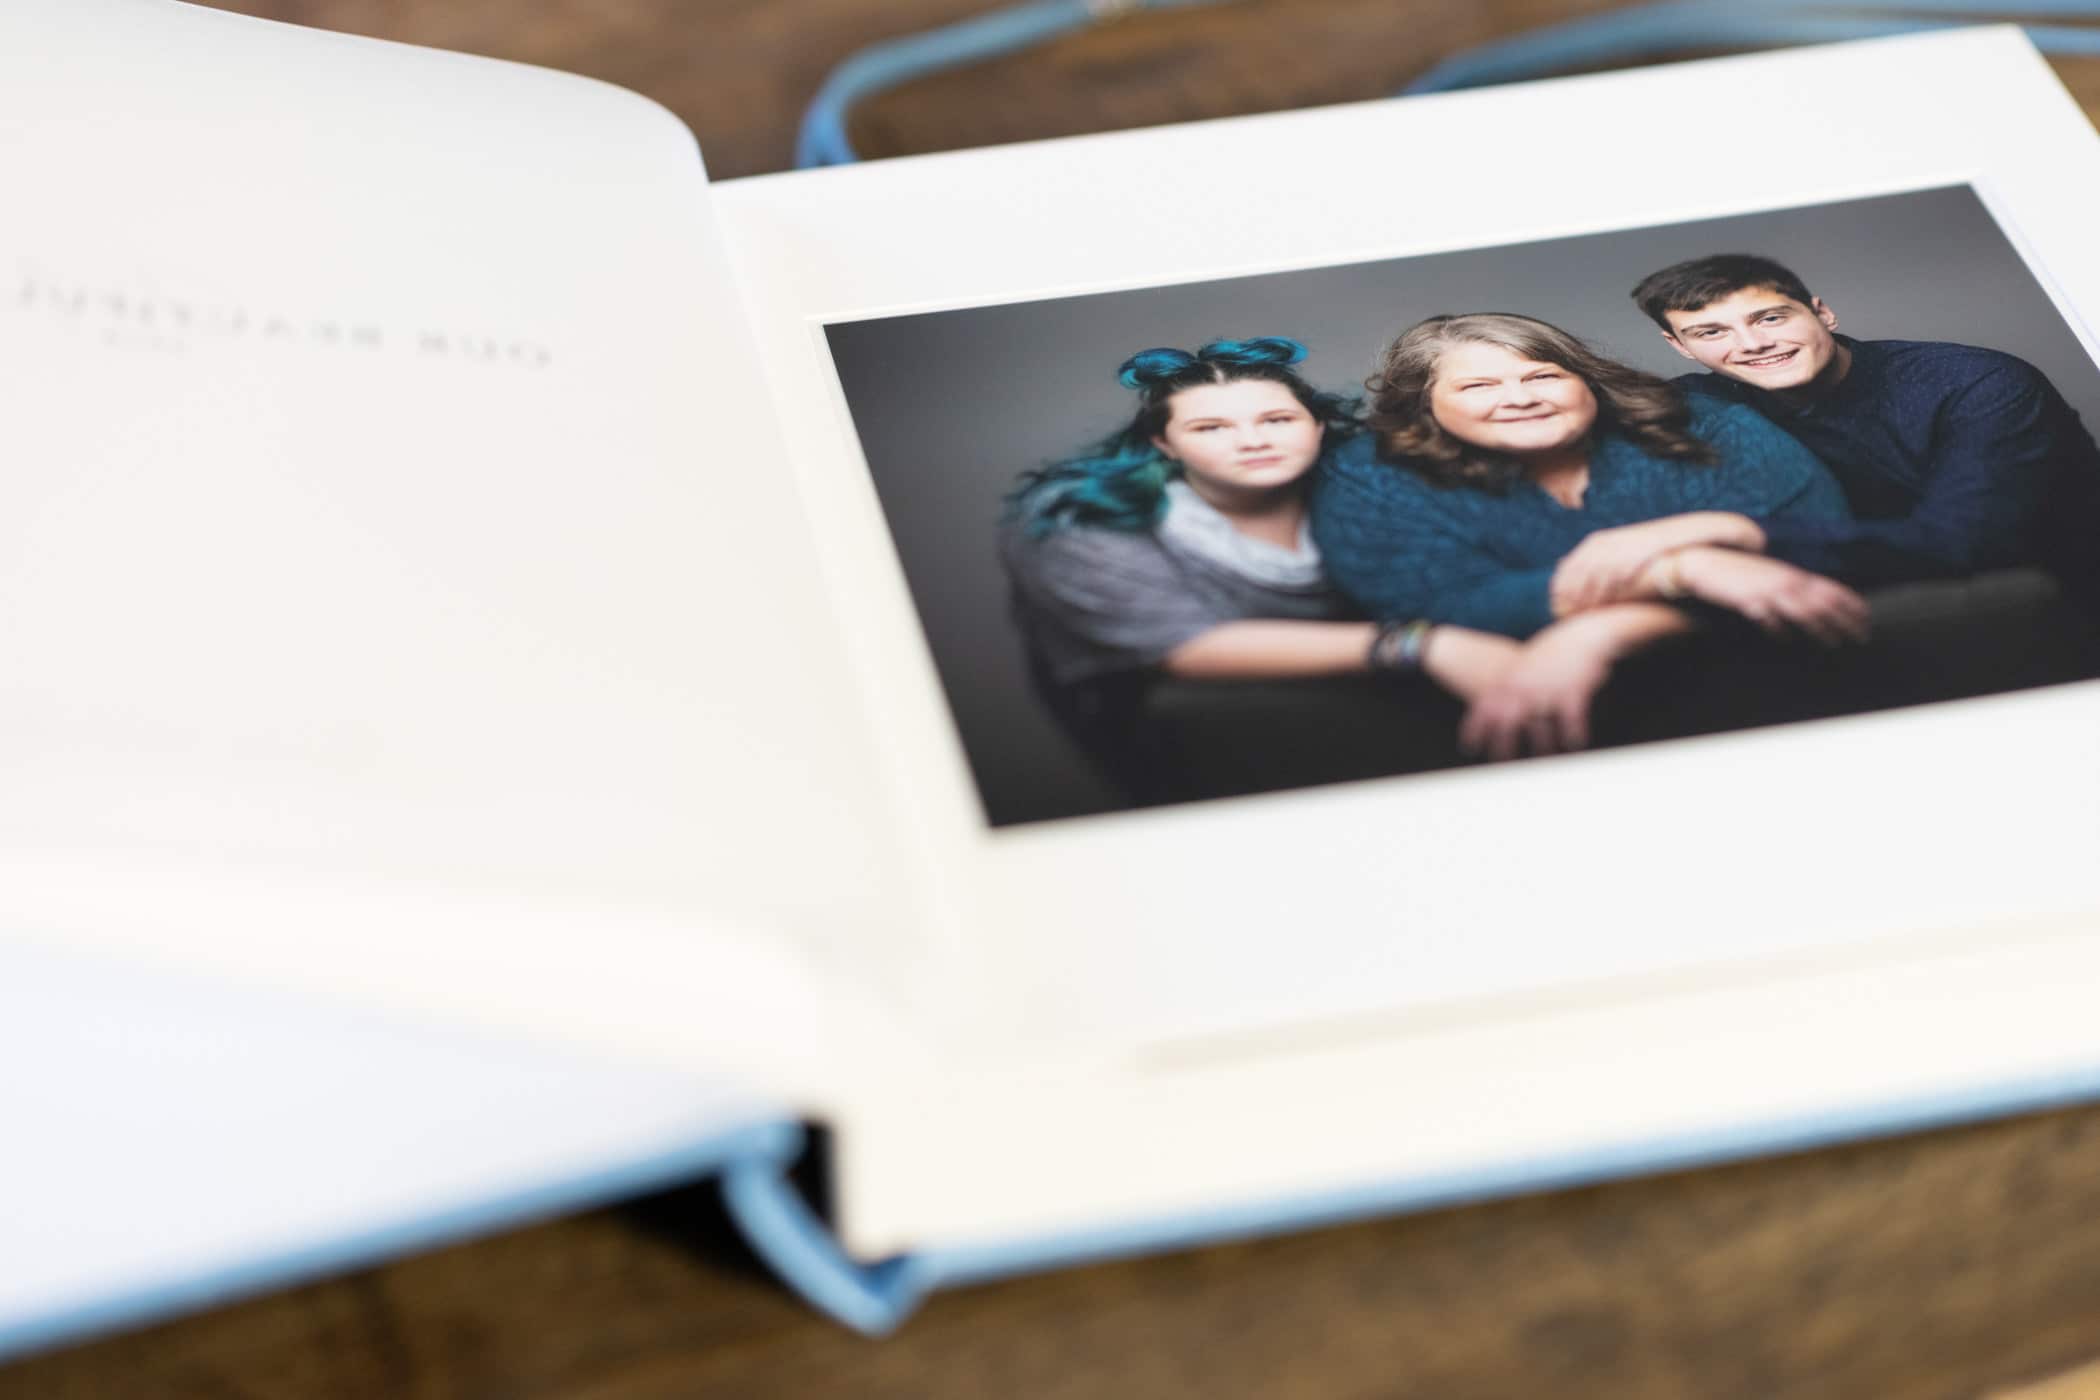 close-up of a photo album page displaying a family portrait with mother and two children, one on each side.